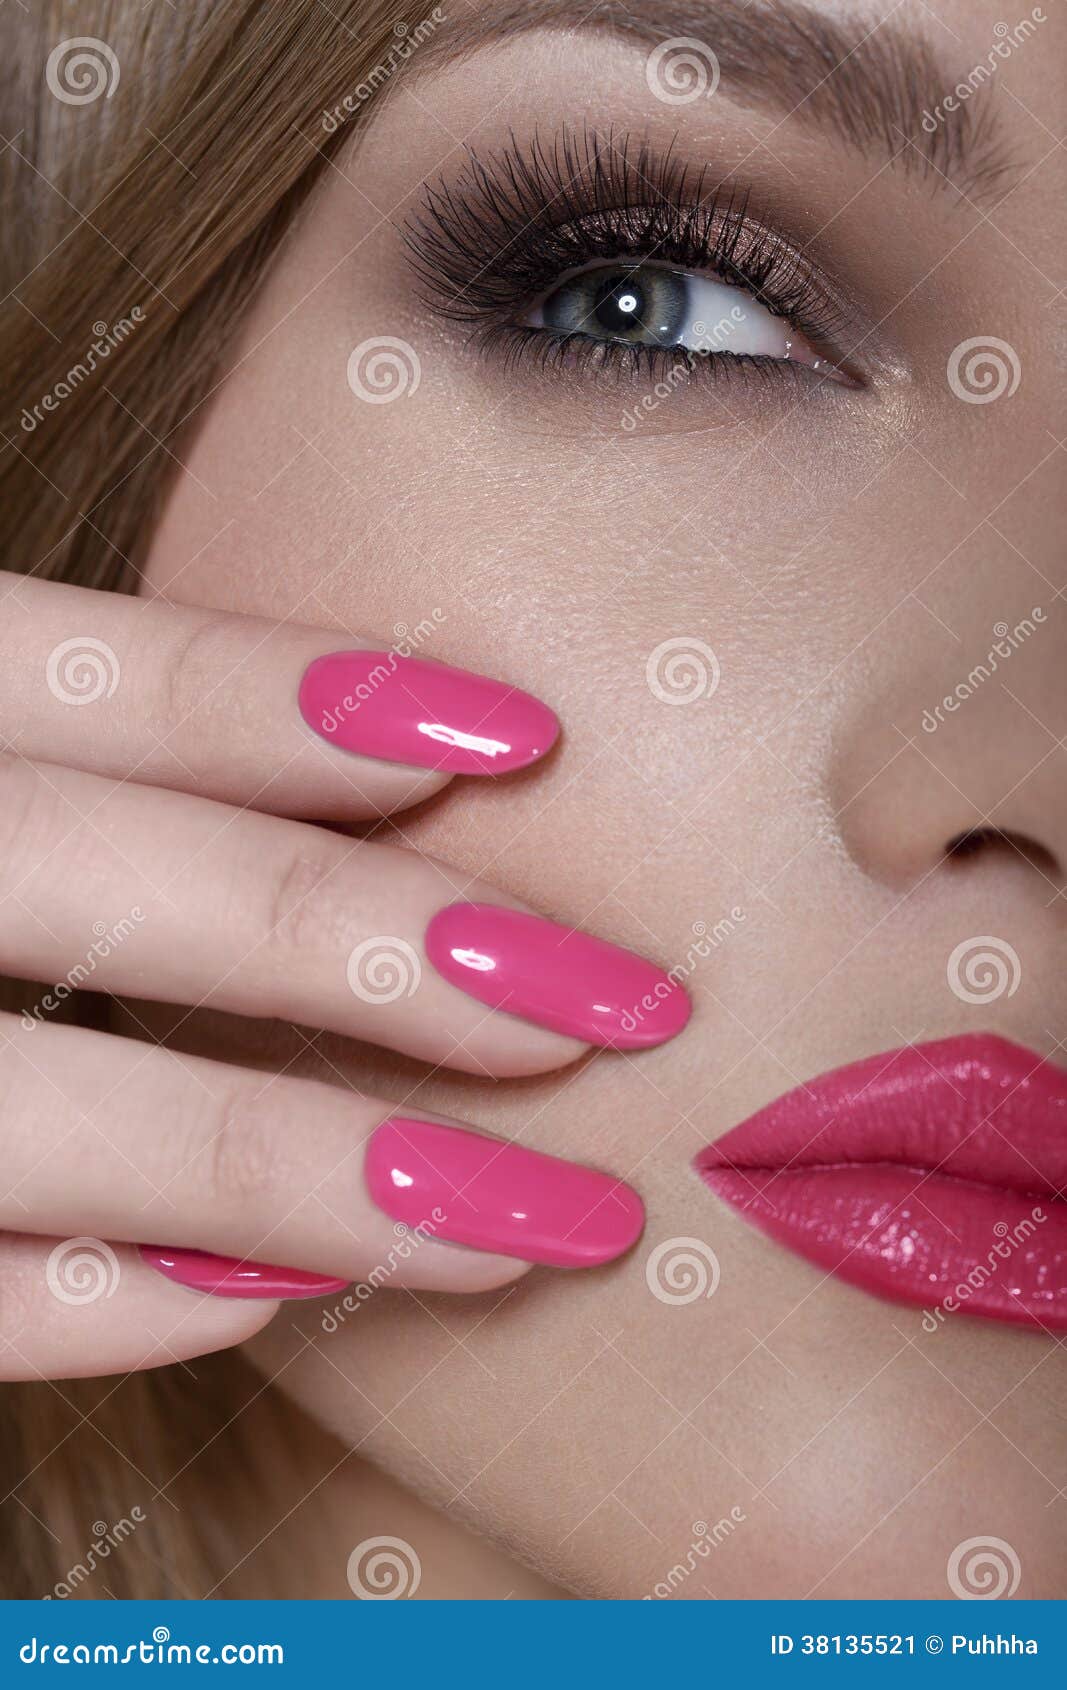 Beautiful Woman With Pink Nails And Luxury Makeup. Red Lips And Long